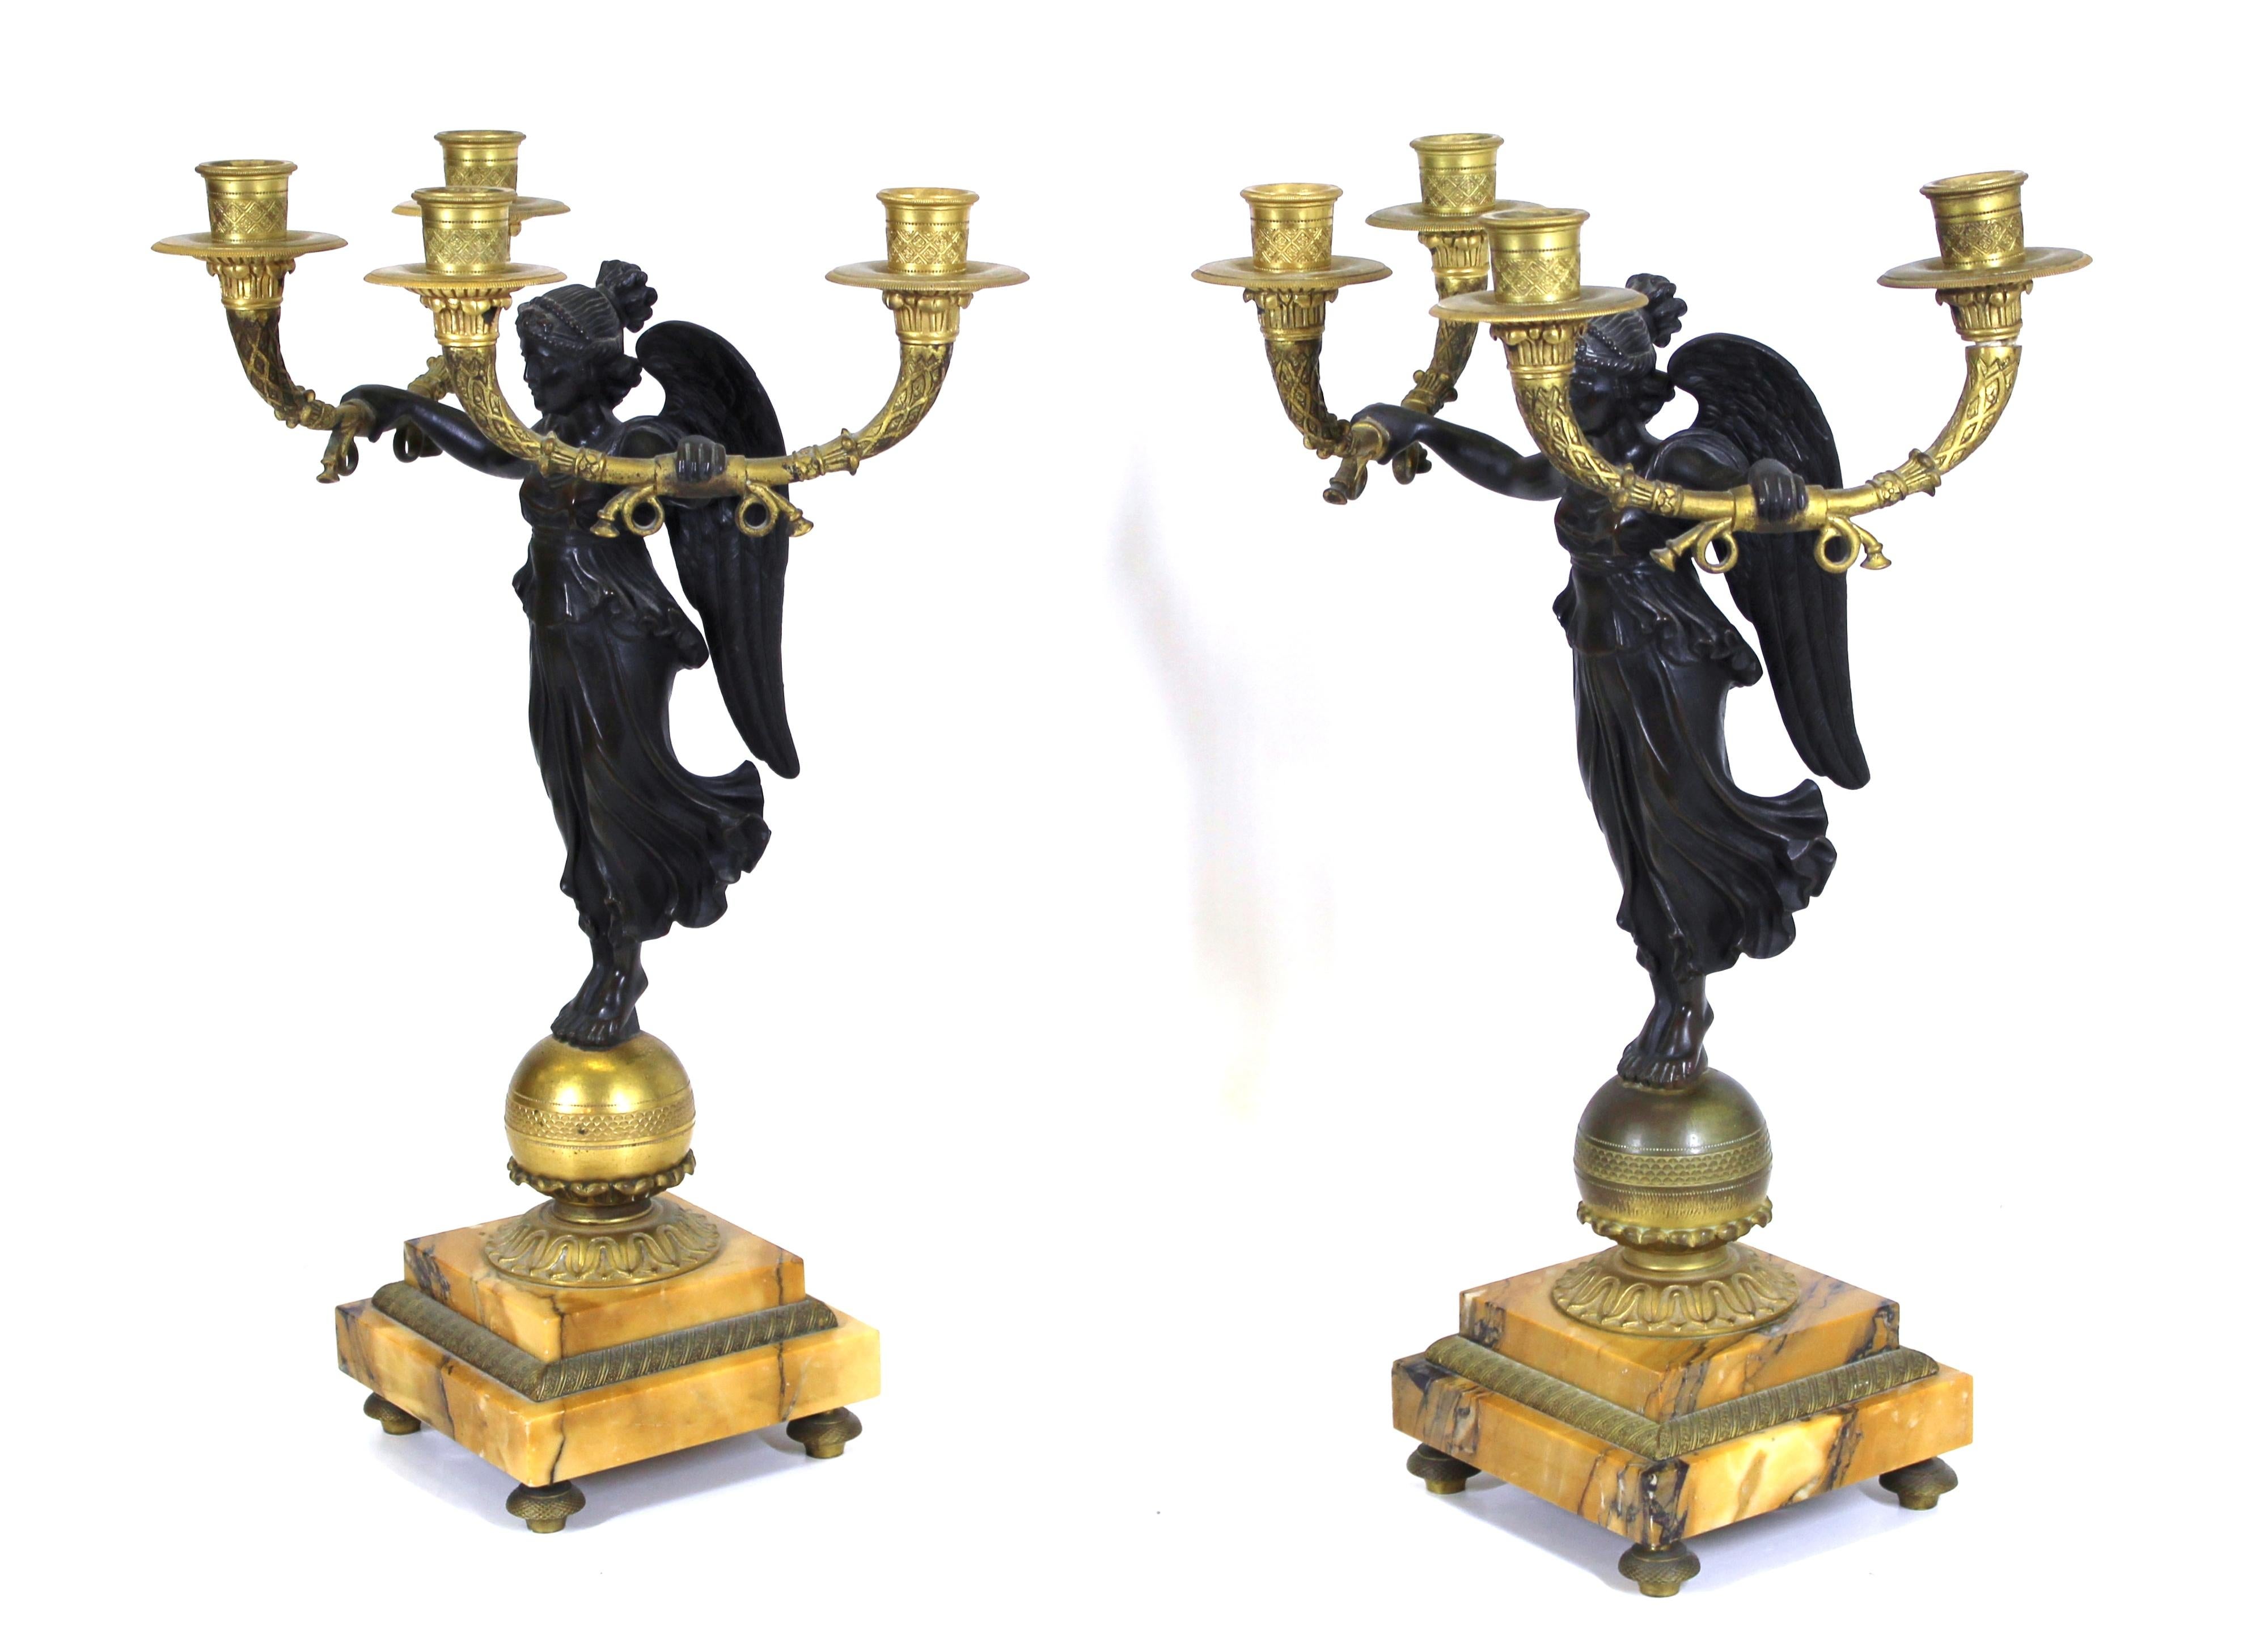 French Empire style bronze dore and patinated bronze pair of candelabras with winged victories on stepped marble bases holding up two candle holders on each side, circa mid-19th century.